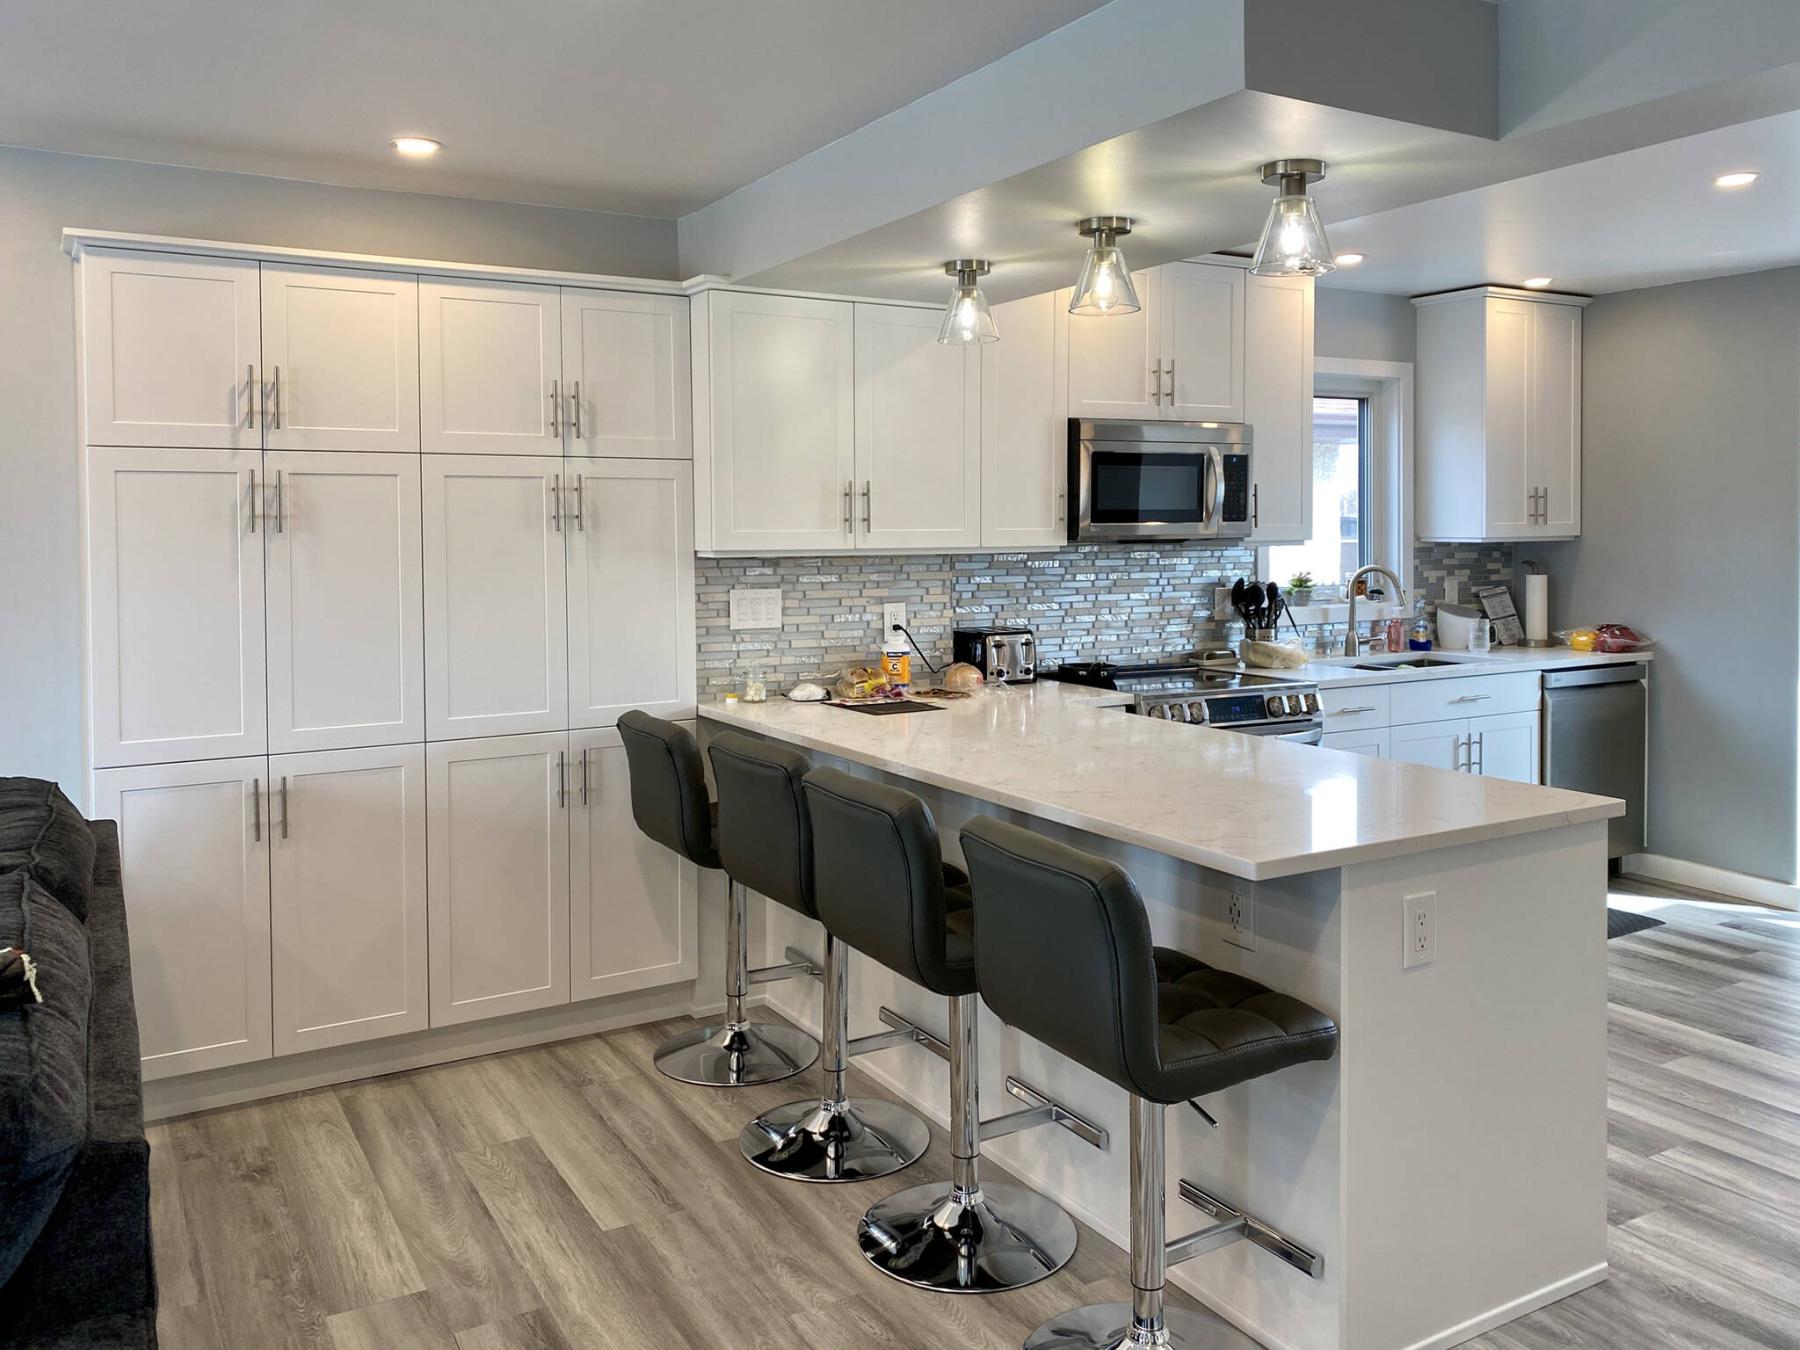  <p>Photos by Marc LaBossiere / Winnipeg Free Press</p>
                                <p>The design layout of the kitchen with new support beam and bulkhead, accommodates a full wall of cabinets on either side of the peninsula island.</p> 